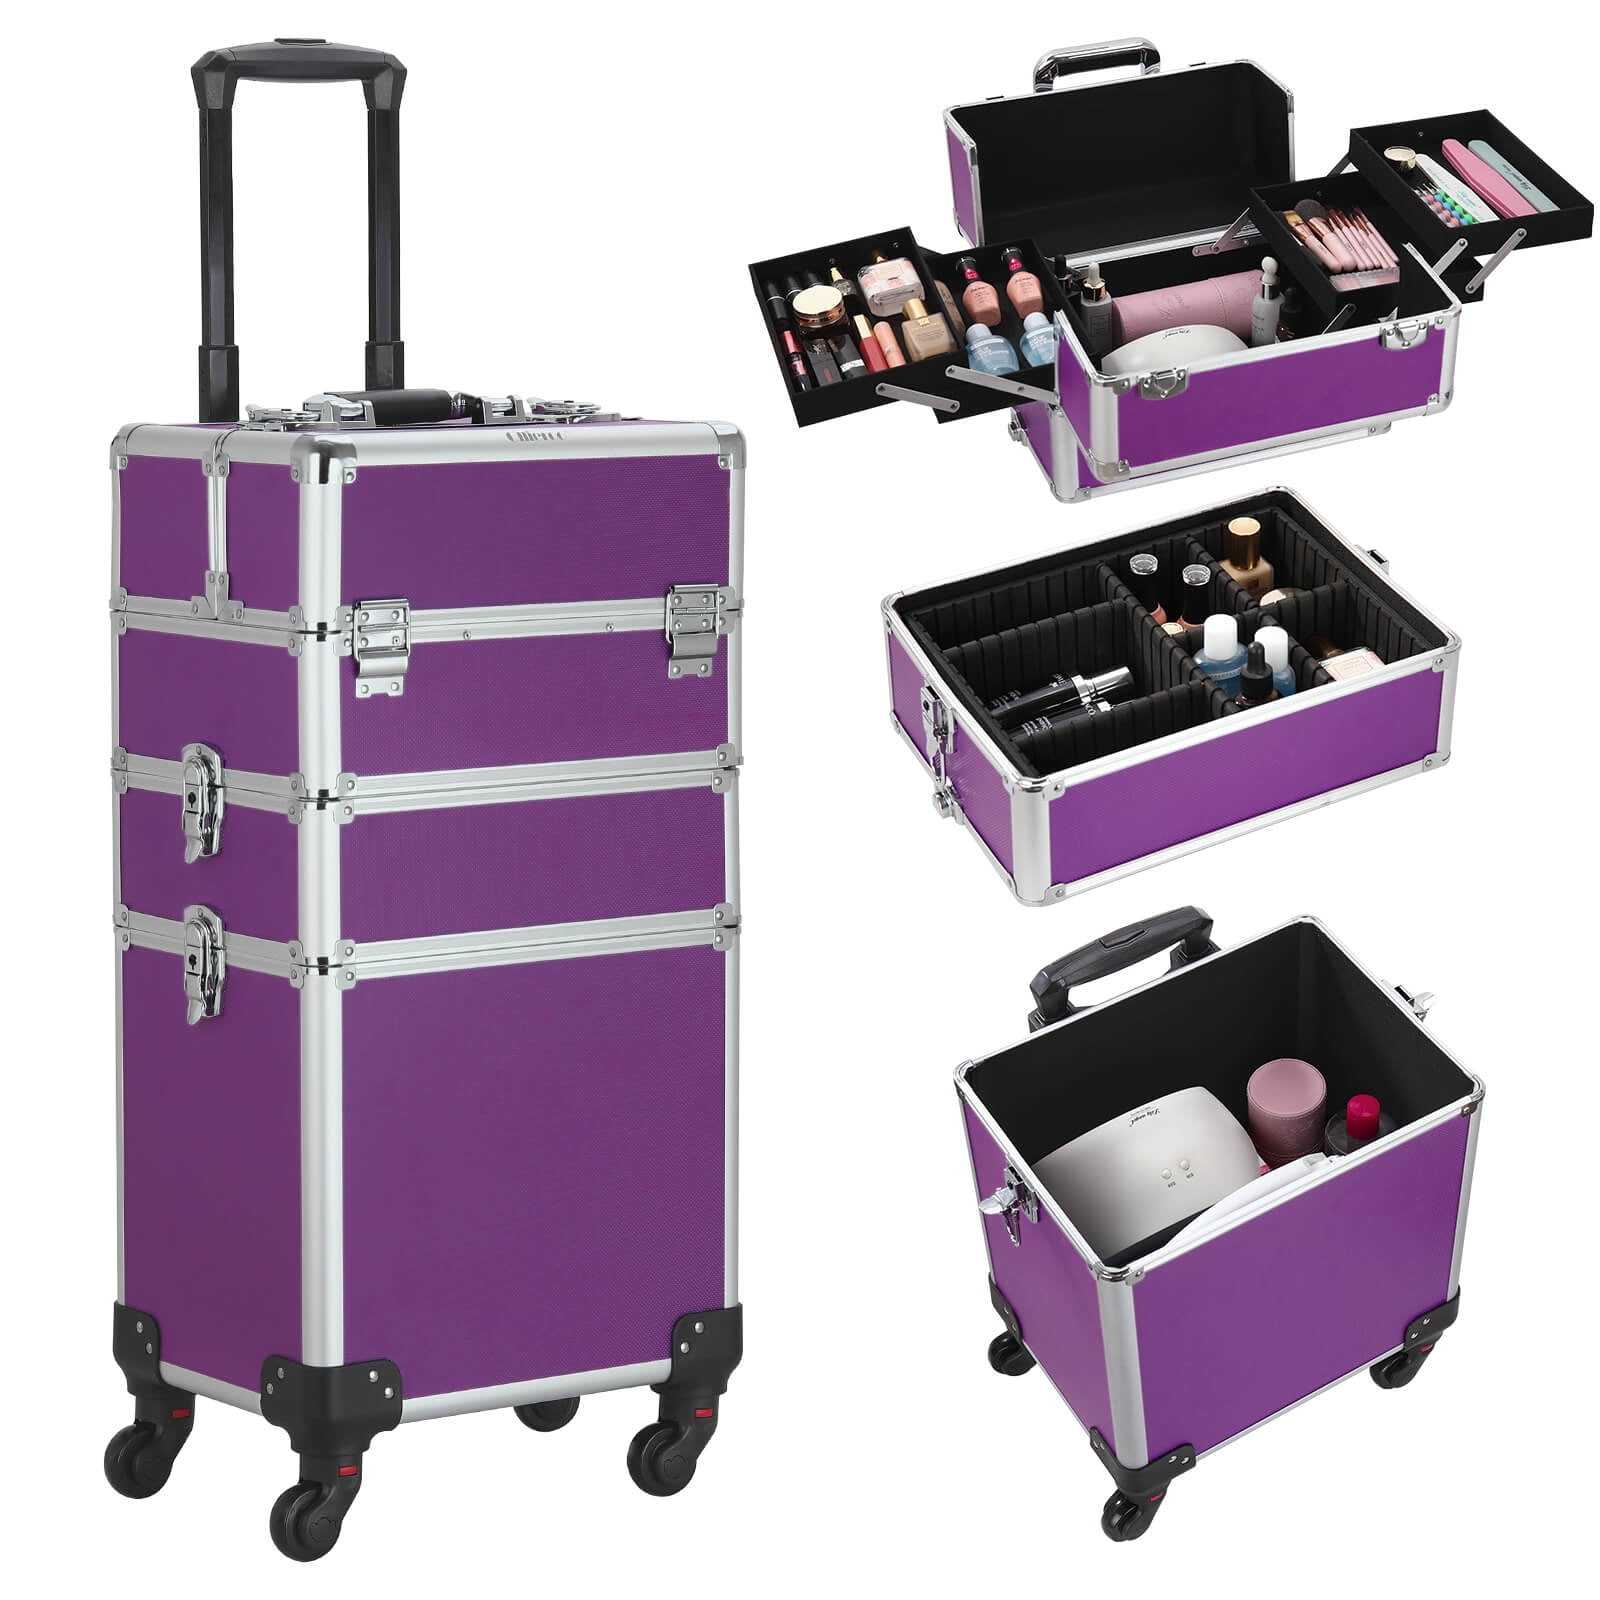 Mllieroo Professional Rolling Makeup Train Travel Case 3